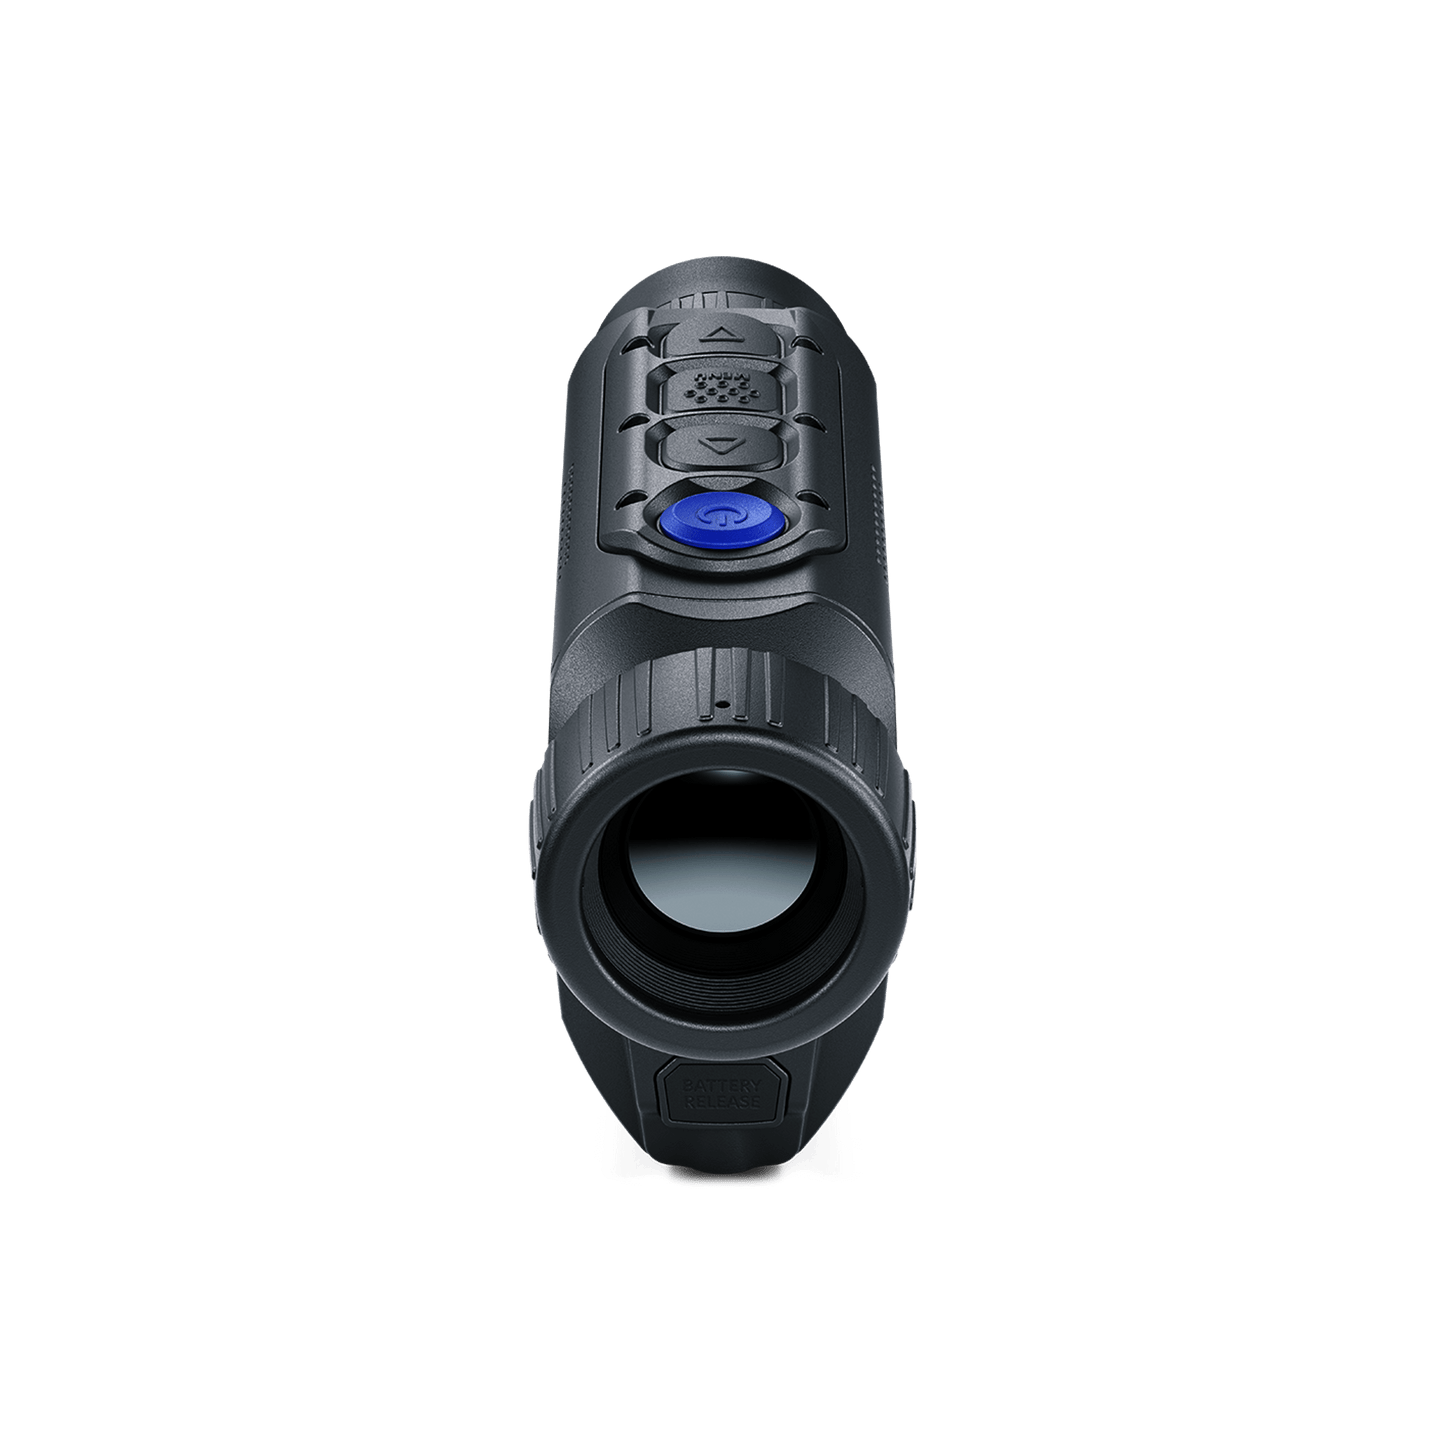 Cape Thermal Pulsar Axion XM30F Handheld Thermal Monocular for Sale Front View